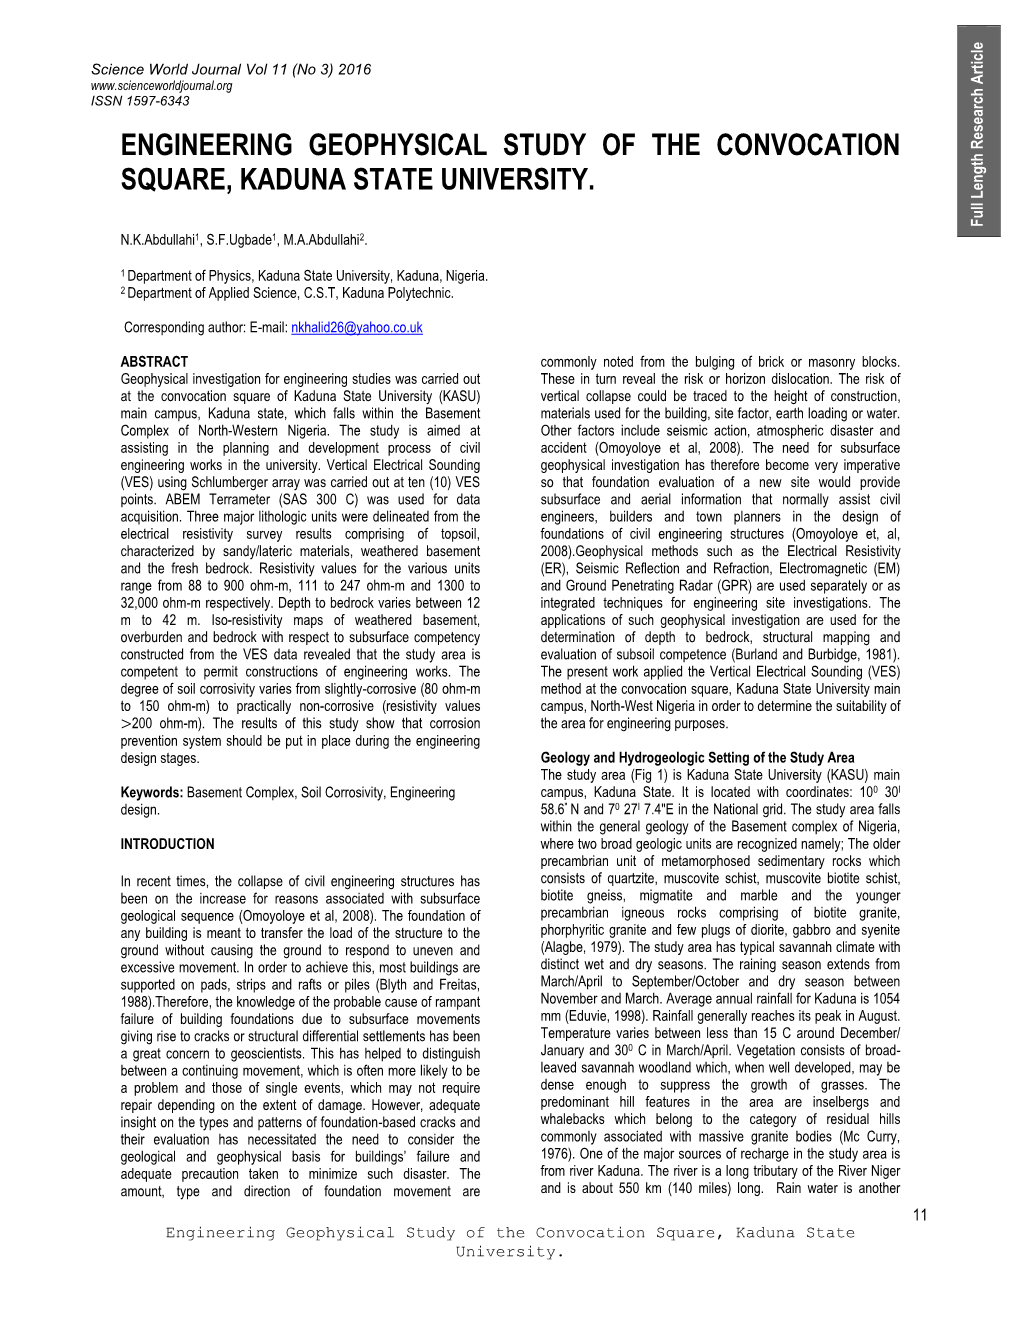 Engineering Geophysical Study of the Convocation Square, Kaduna State University